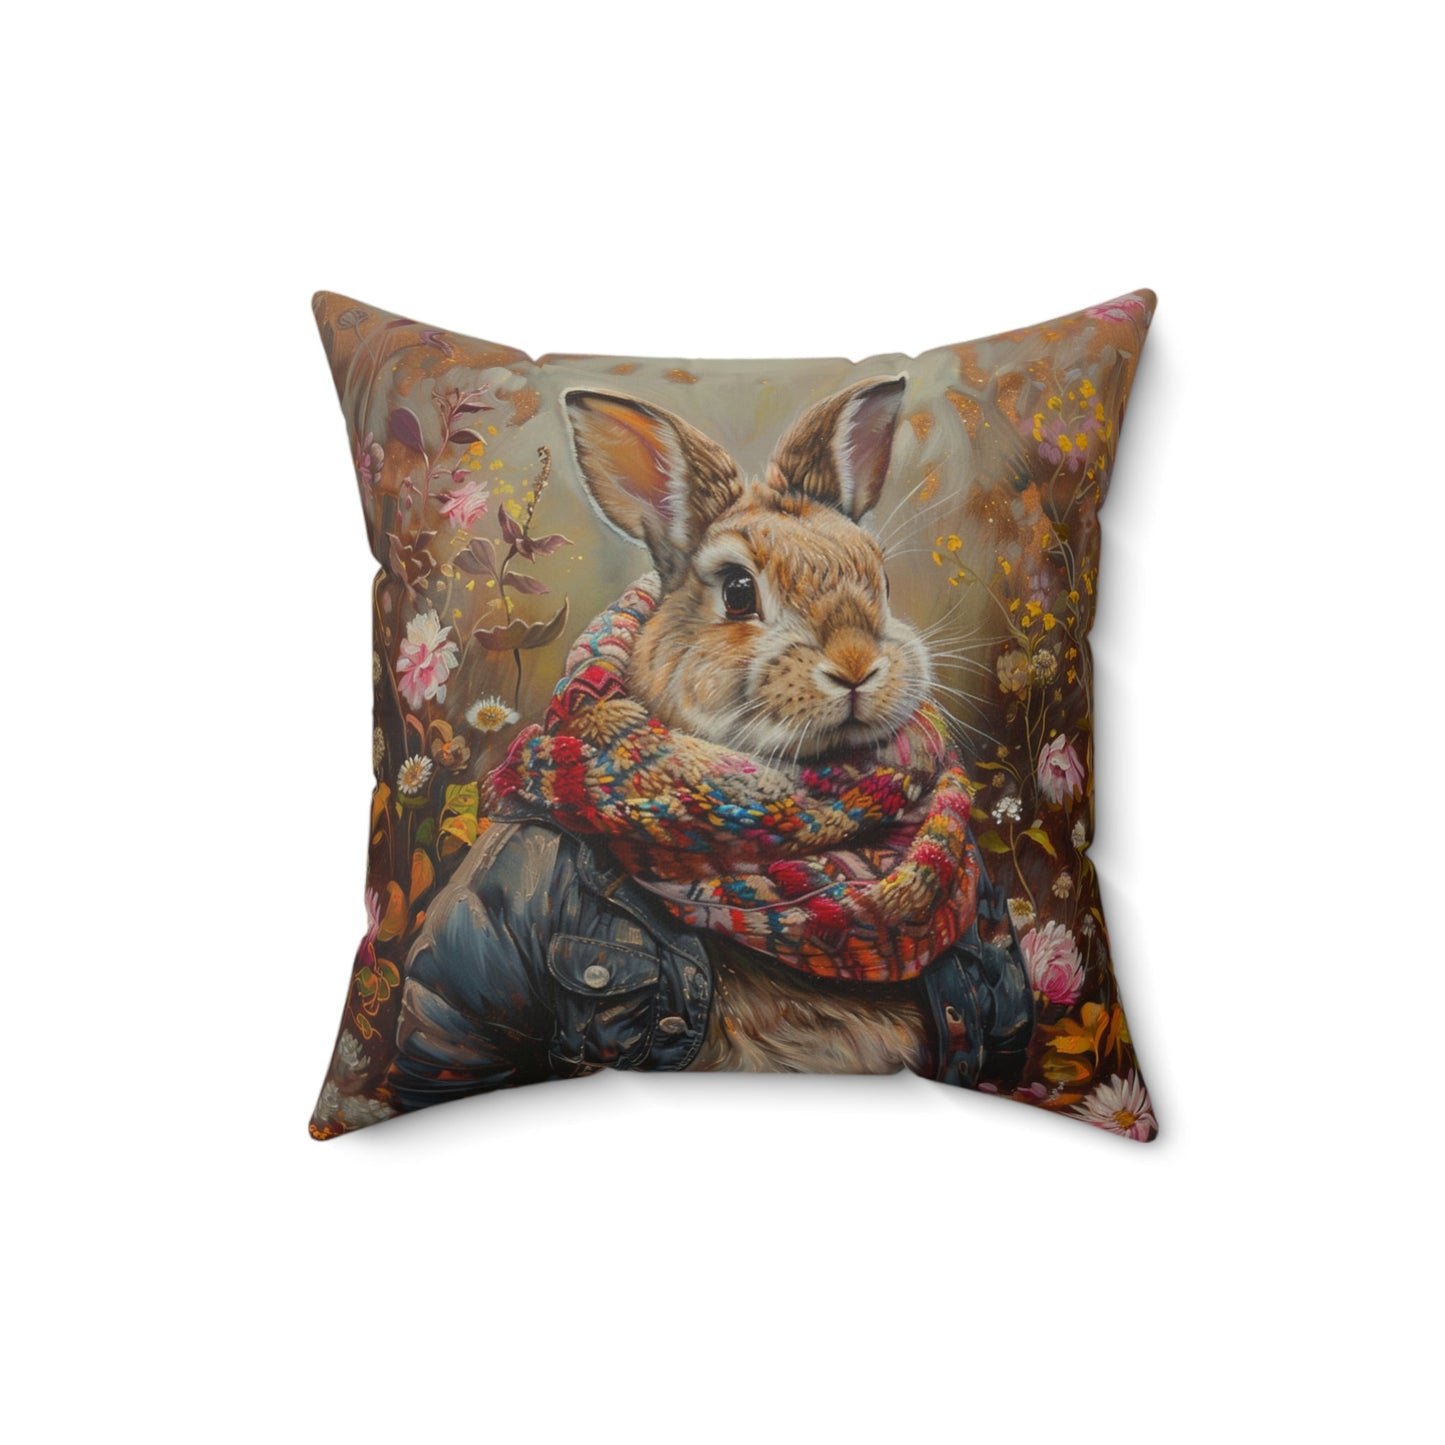 Cute Rabbit with Jacket & Scarf in Wildflowers Pillows - Whimsical, Magical - FlooredByArt